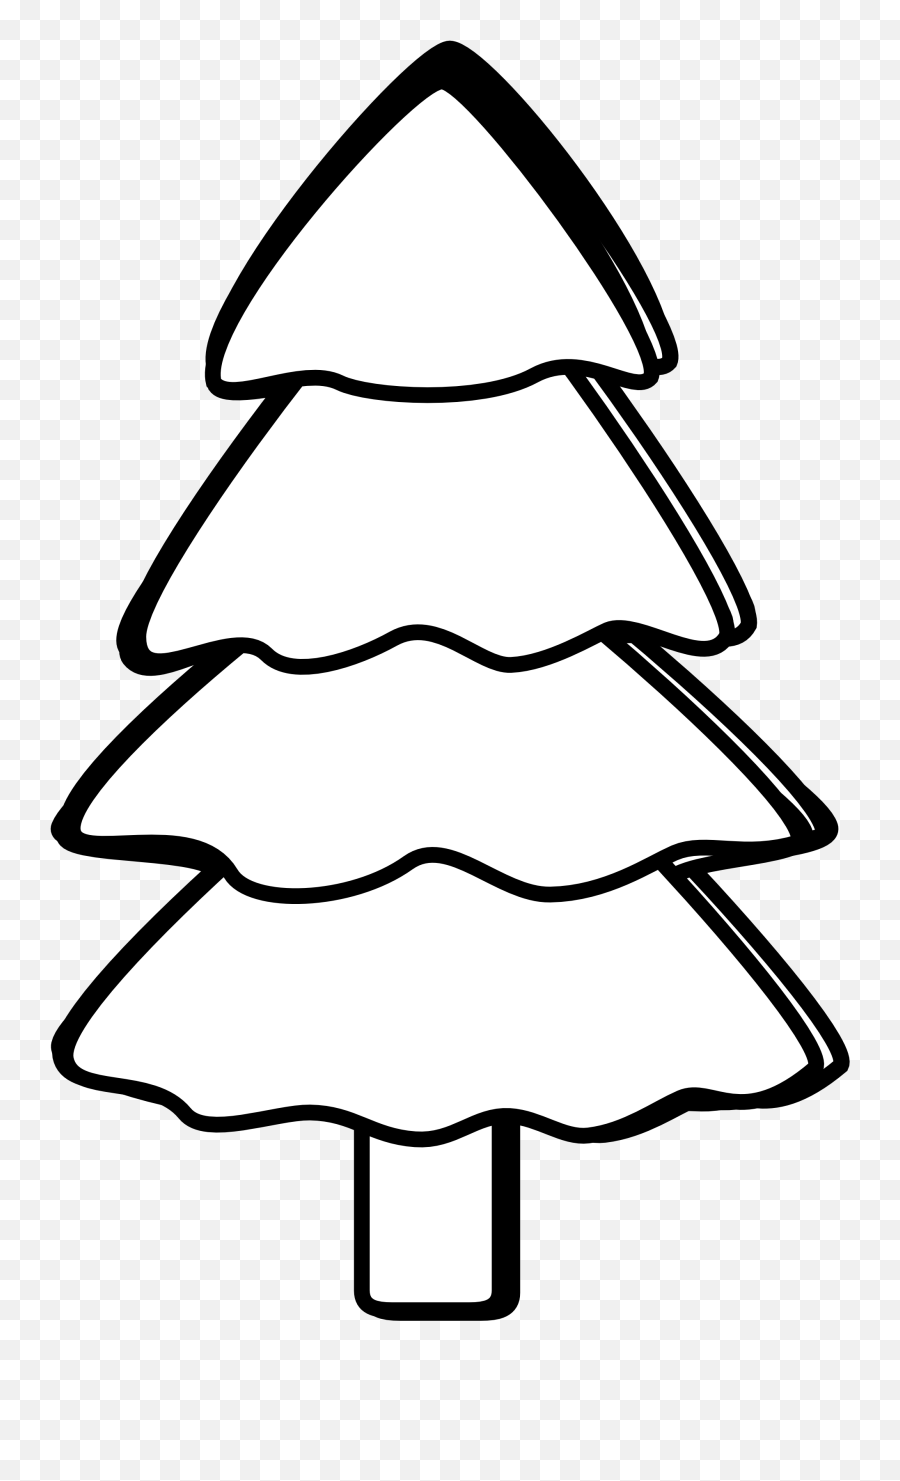 White Christmas Tree Images Clip Art - Novocomtop Christmas Tree Black And White Clip Art Emoji,Christmas Tree Clipart